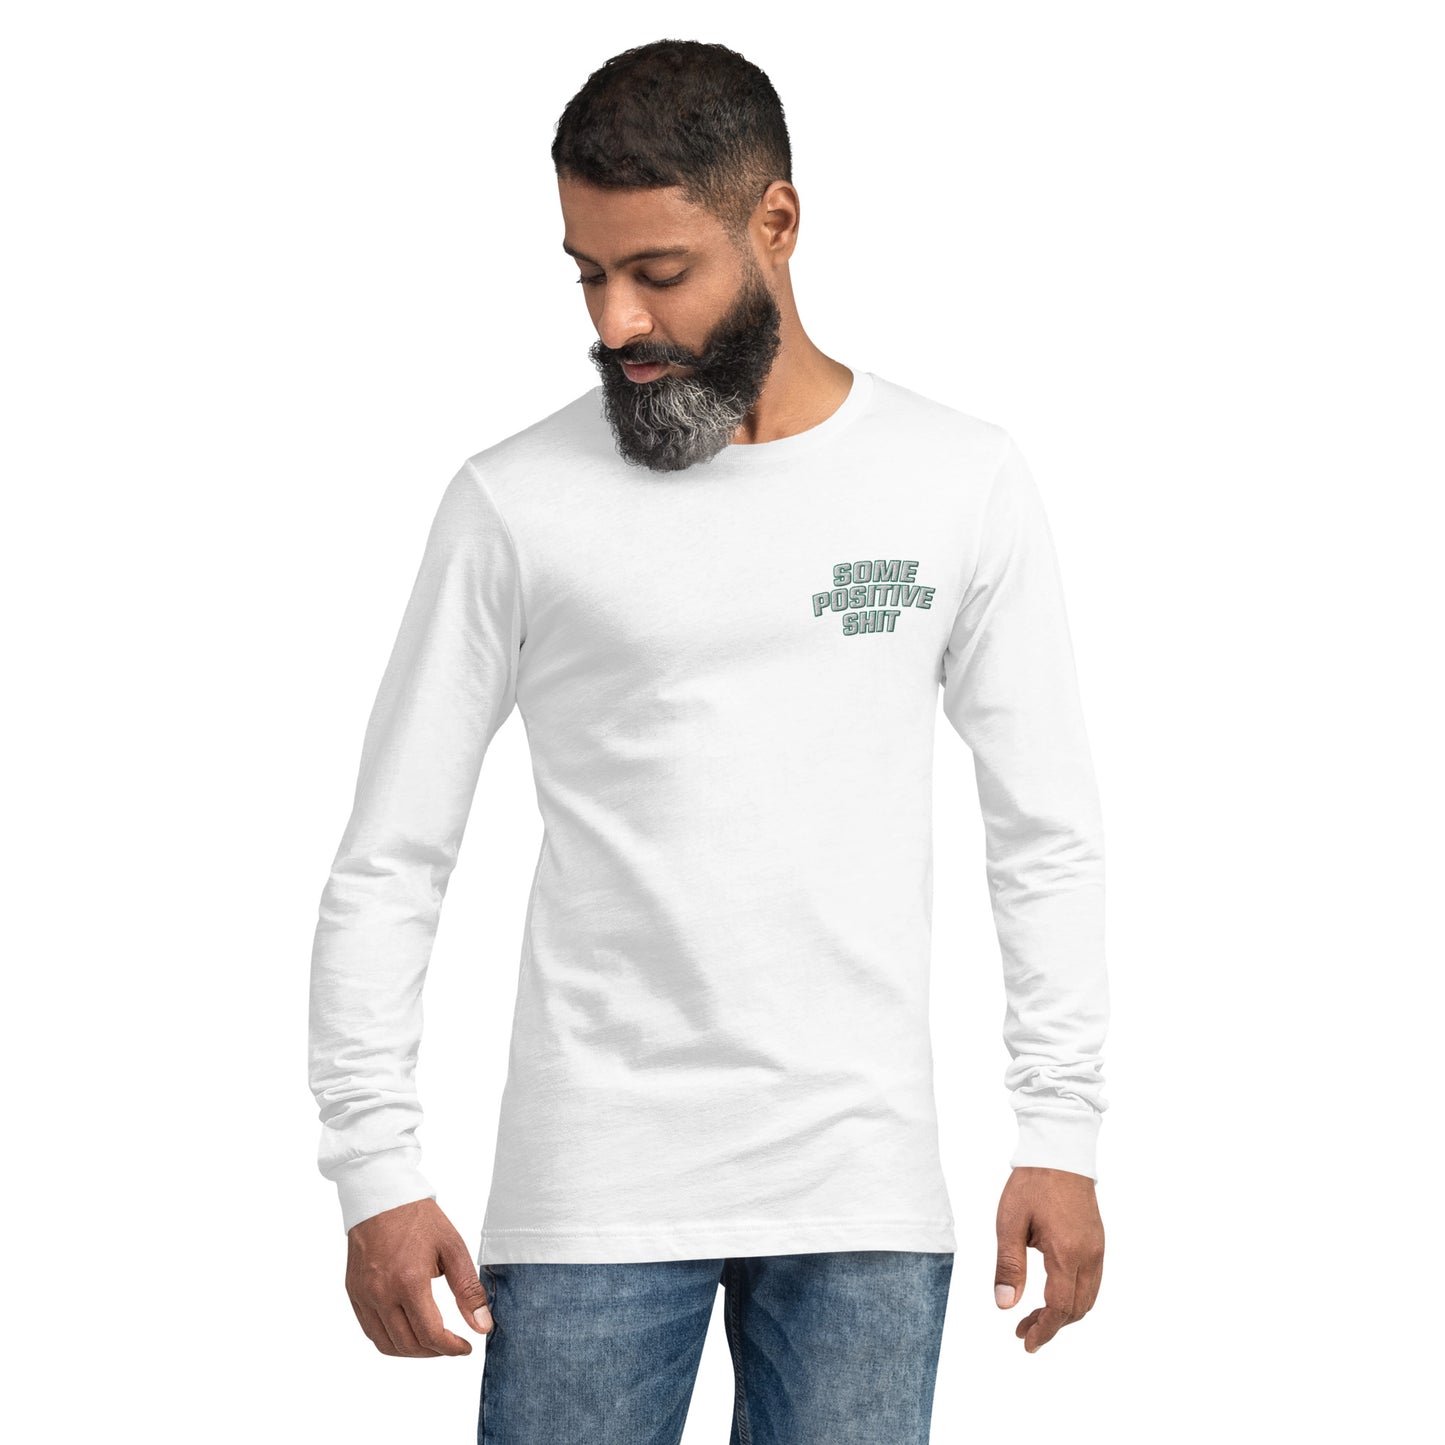 BBP Some Positive Shit Unisex Long Sleeve Tee by Forever Improving